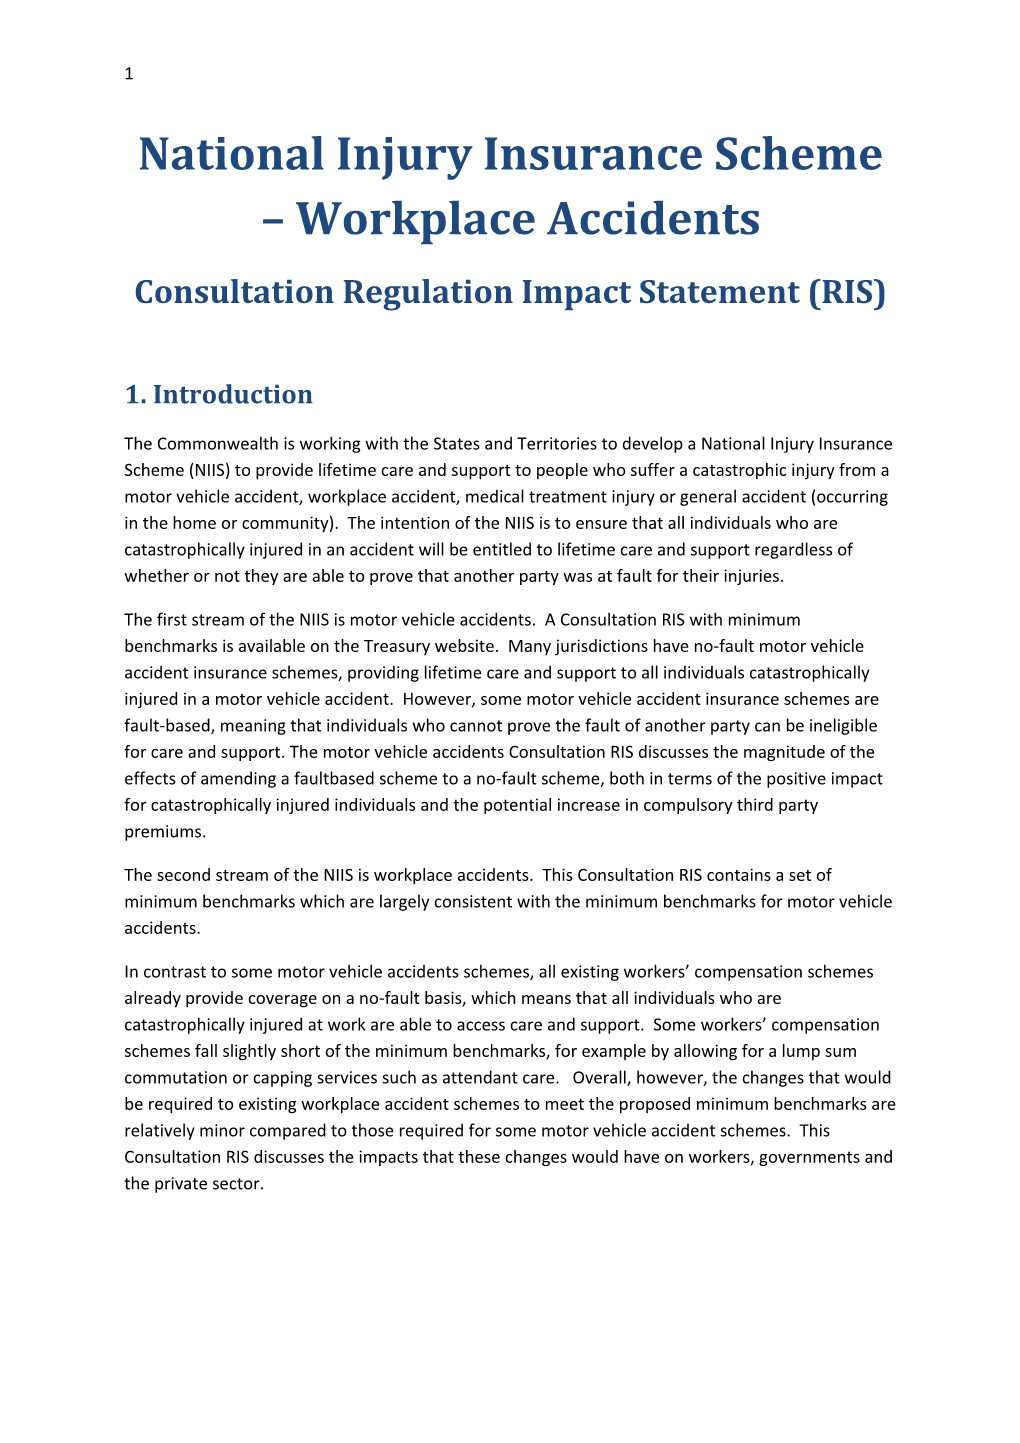 NIIS for Workplace Accidents RIS